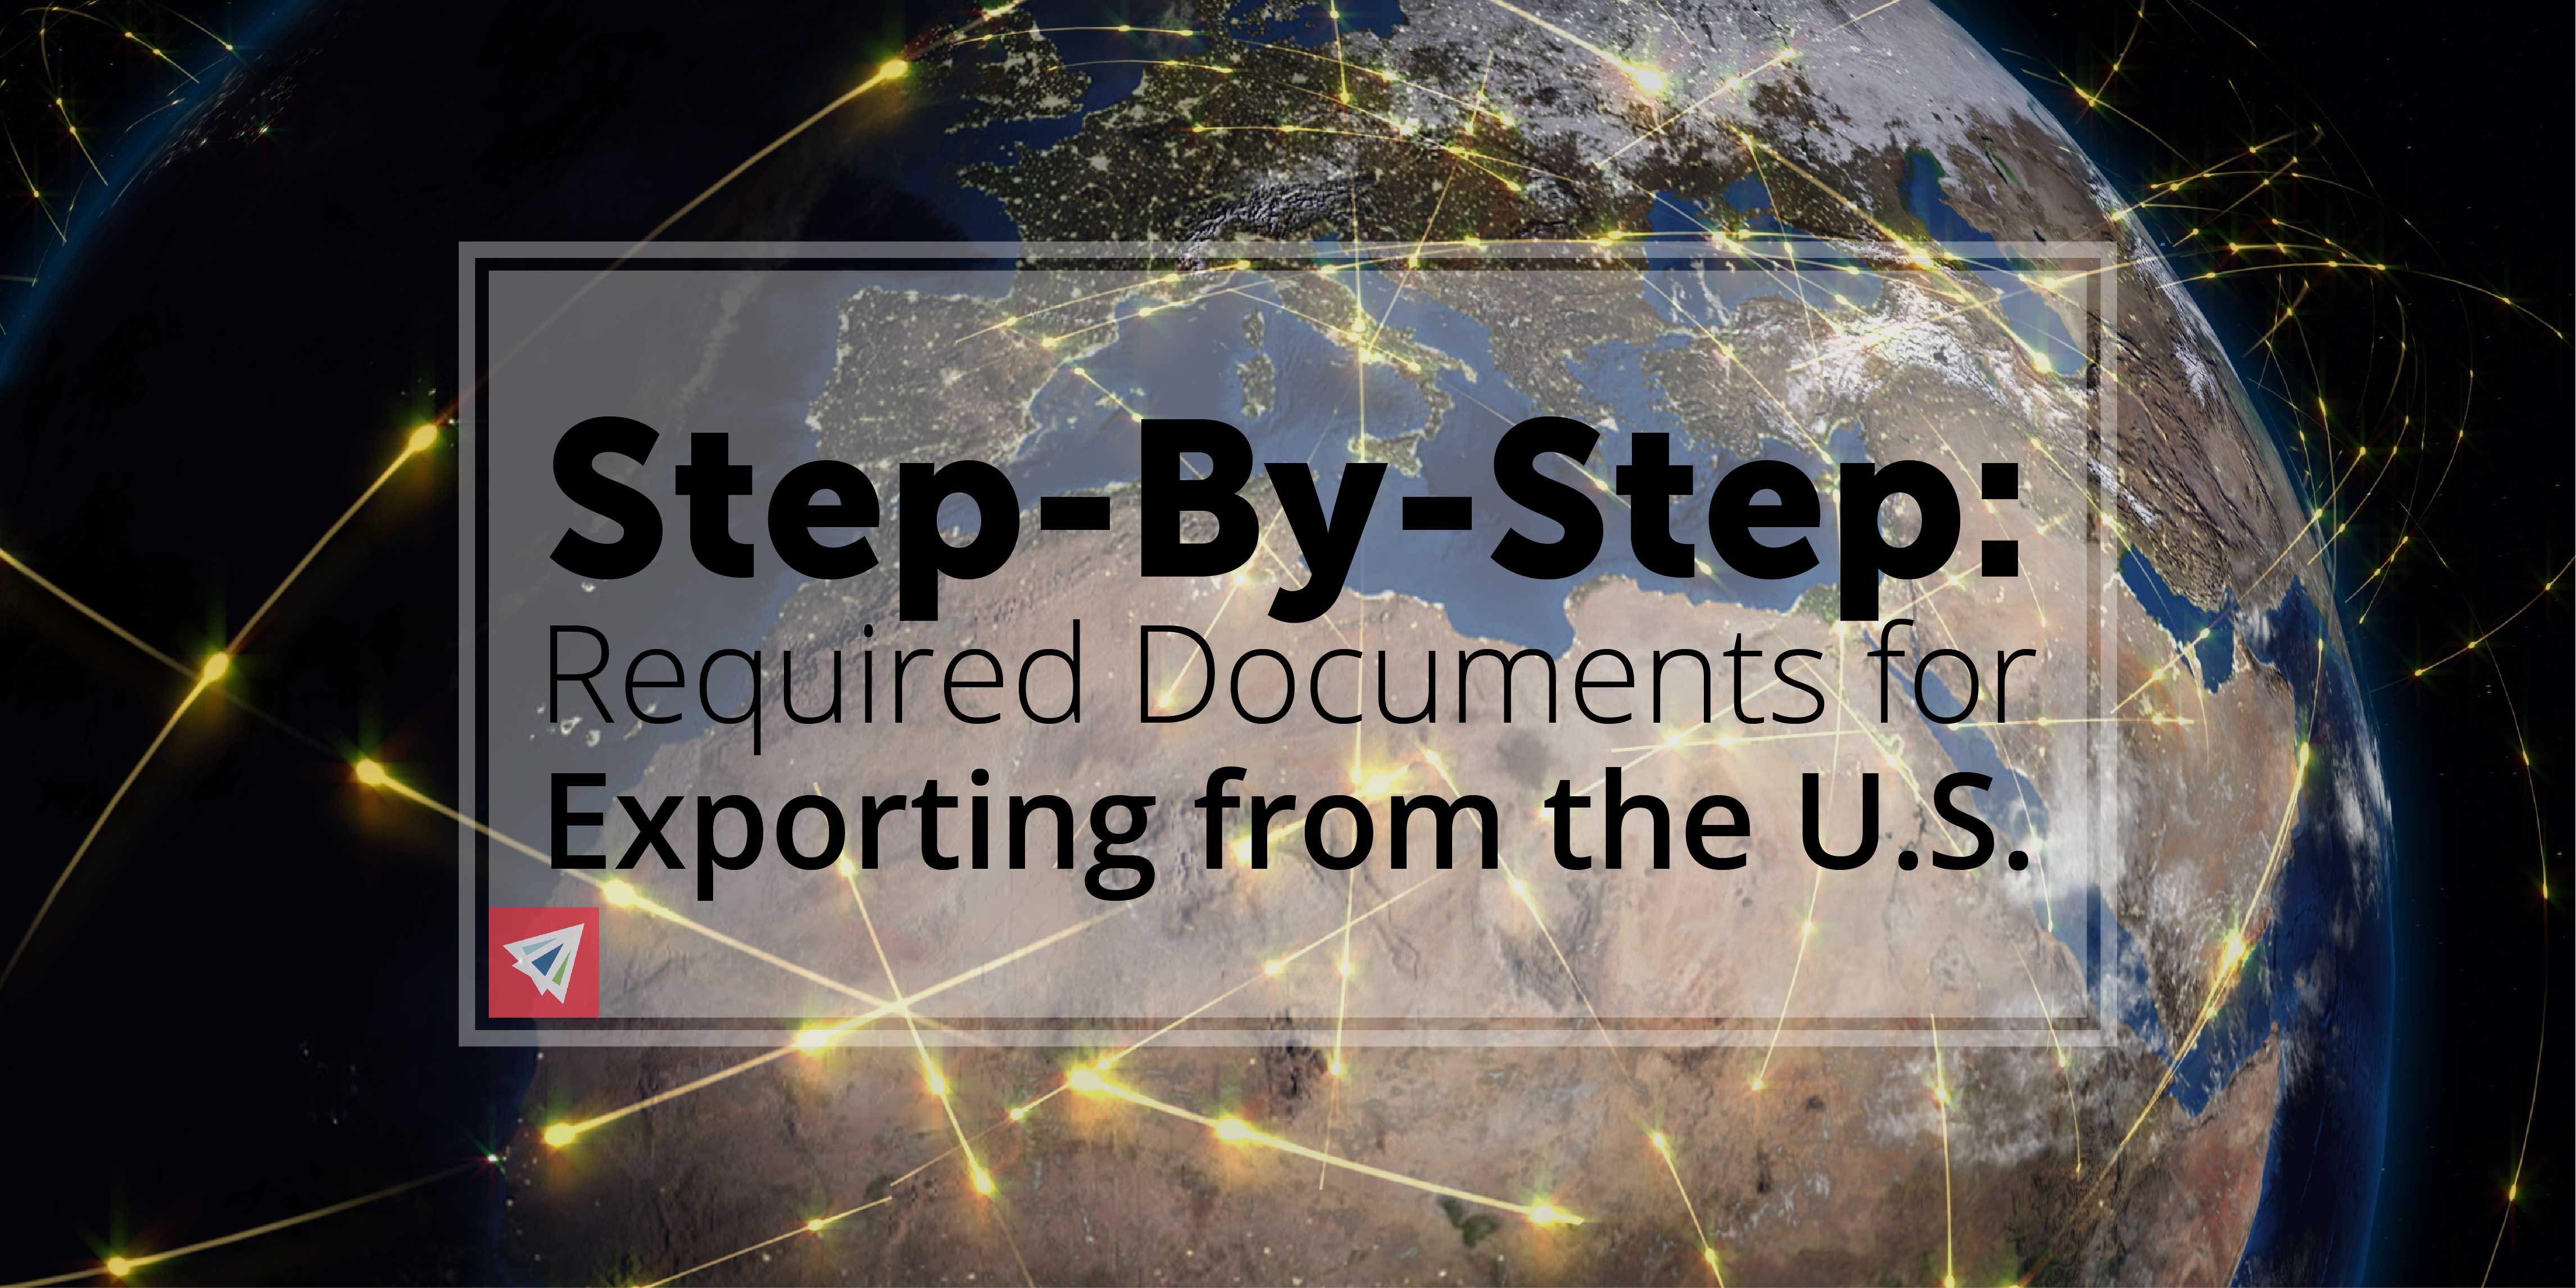 Step-By-Step - Required Documents for Exporting from the U.S